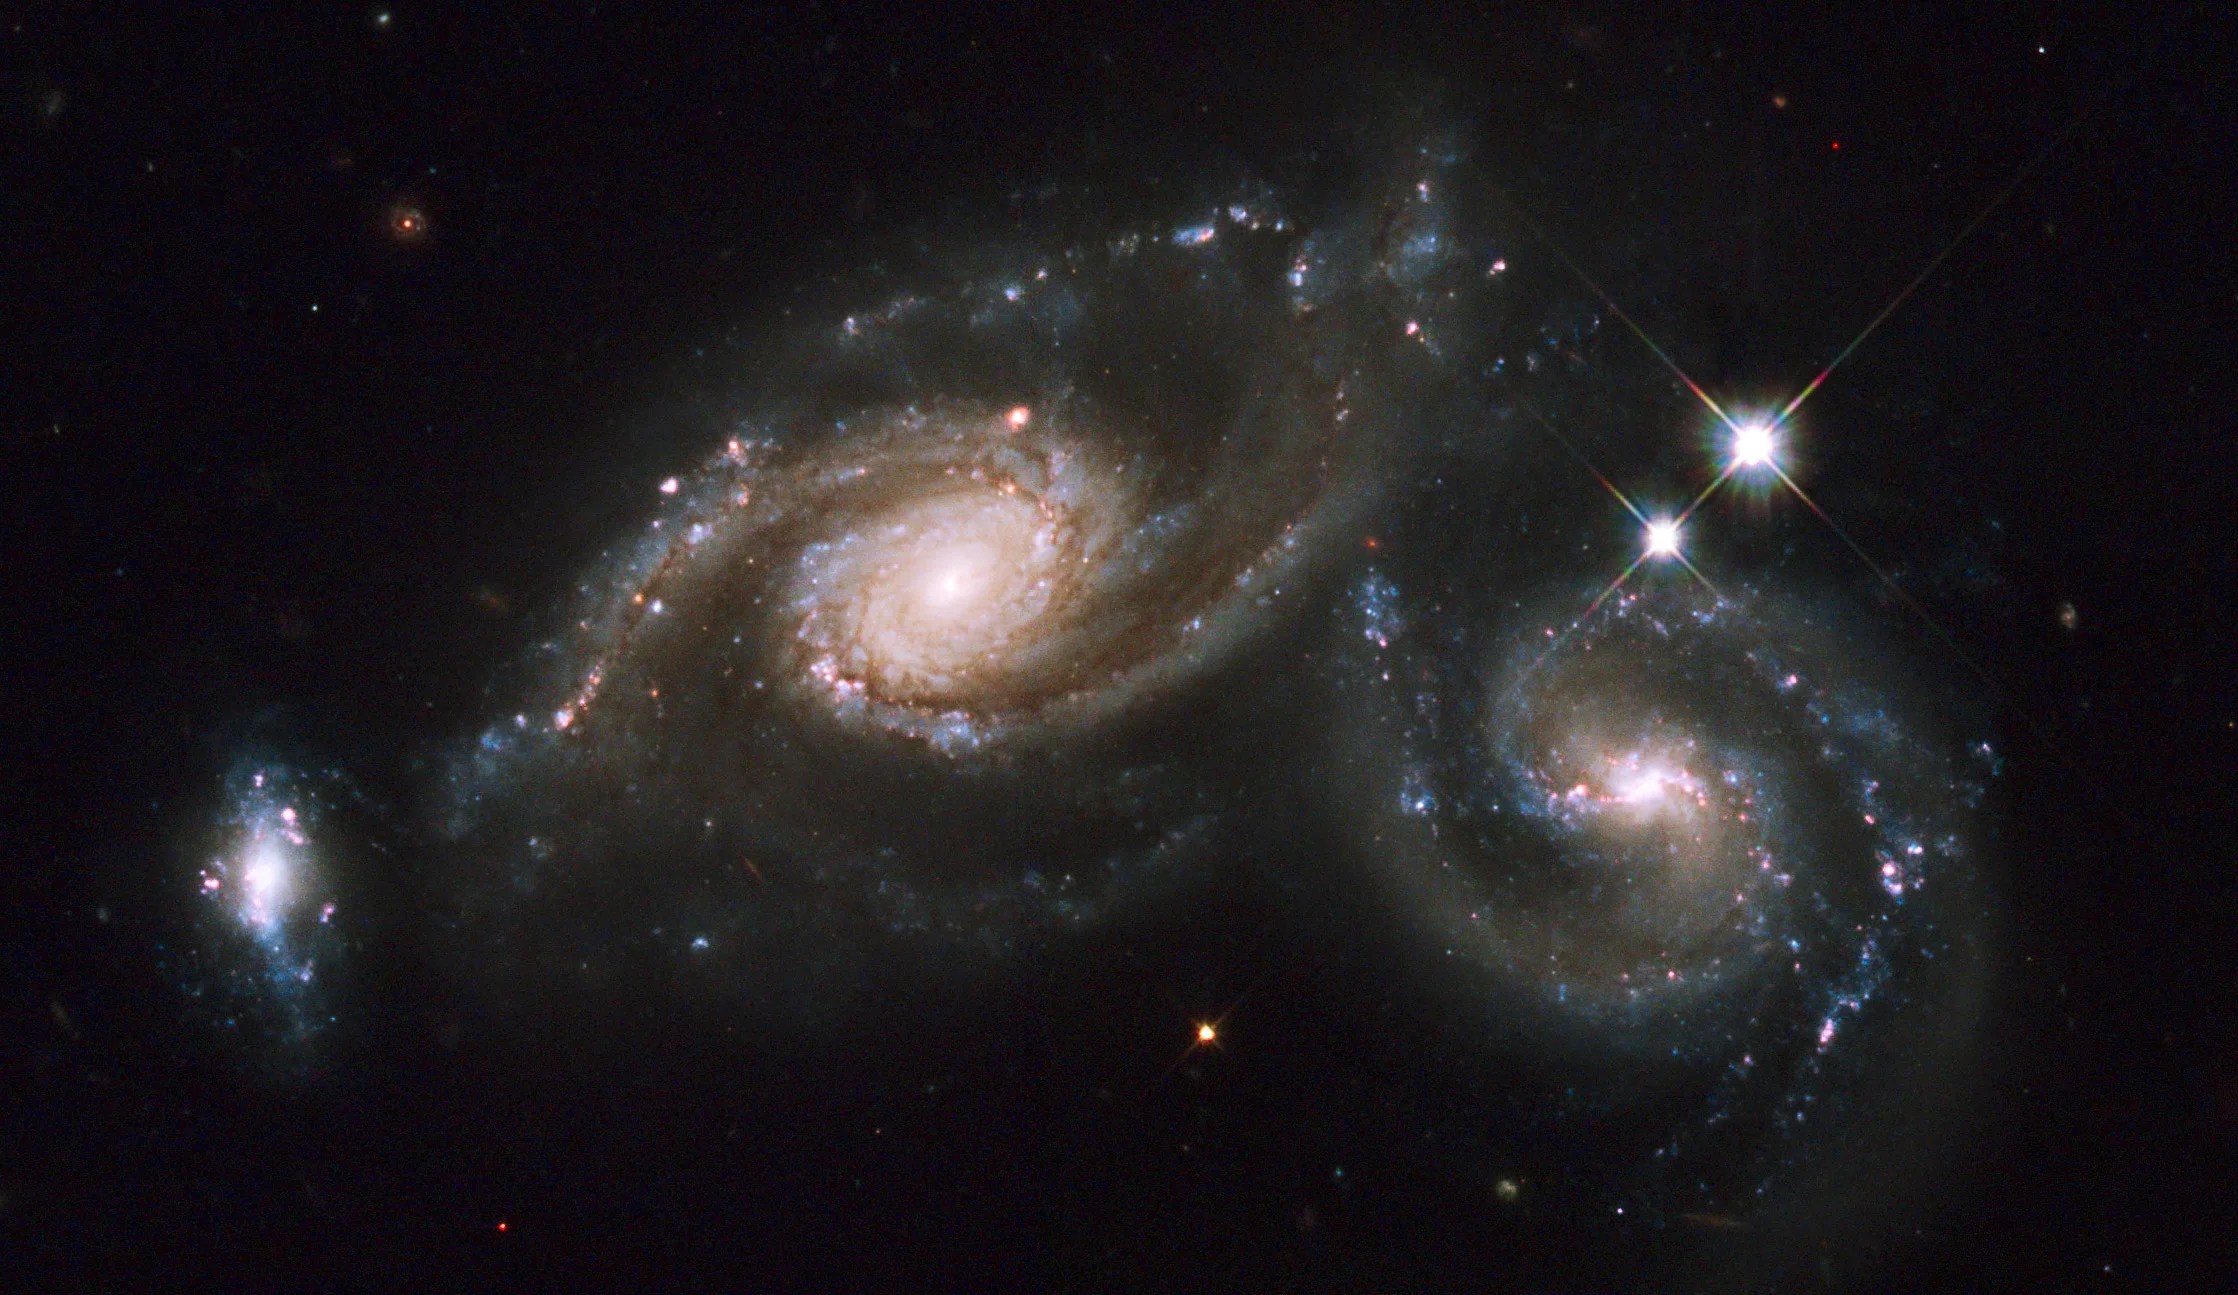 The colliding galaxies of Arp 274 spans about 200,000 light years across and lies about 400 million light years away toward the constellation of Virgo.